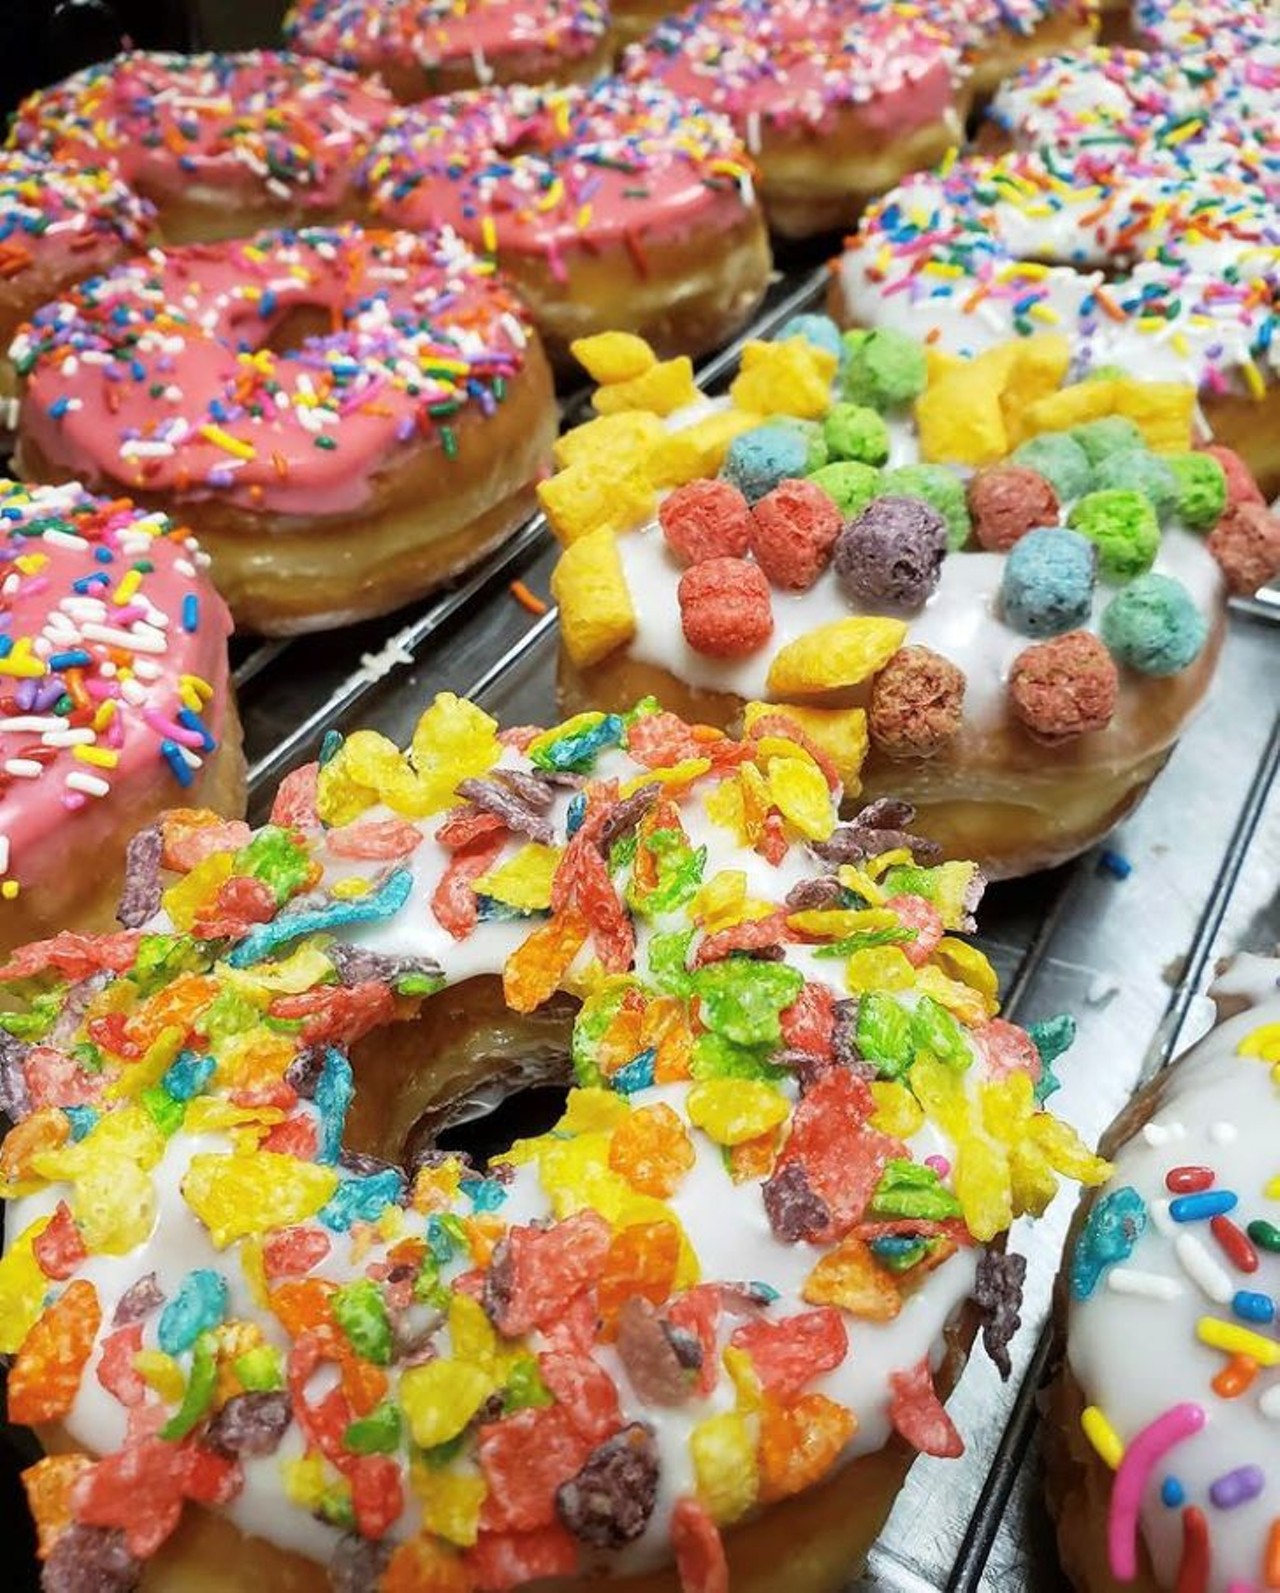 Donuts To Go 
1414 W. First St., Sanford,407-878-2856
Hot coffee and fresh, homemade donuts are available every day at Donuts To Go. Check out their Fruity Pebbles, Cap&#146;n Crunch, or classic sprinkled donuts. 
Photo via Donuts To Go/Instagram